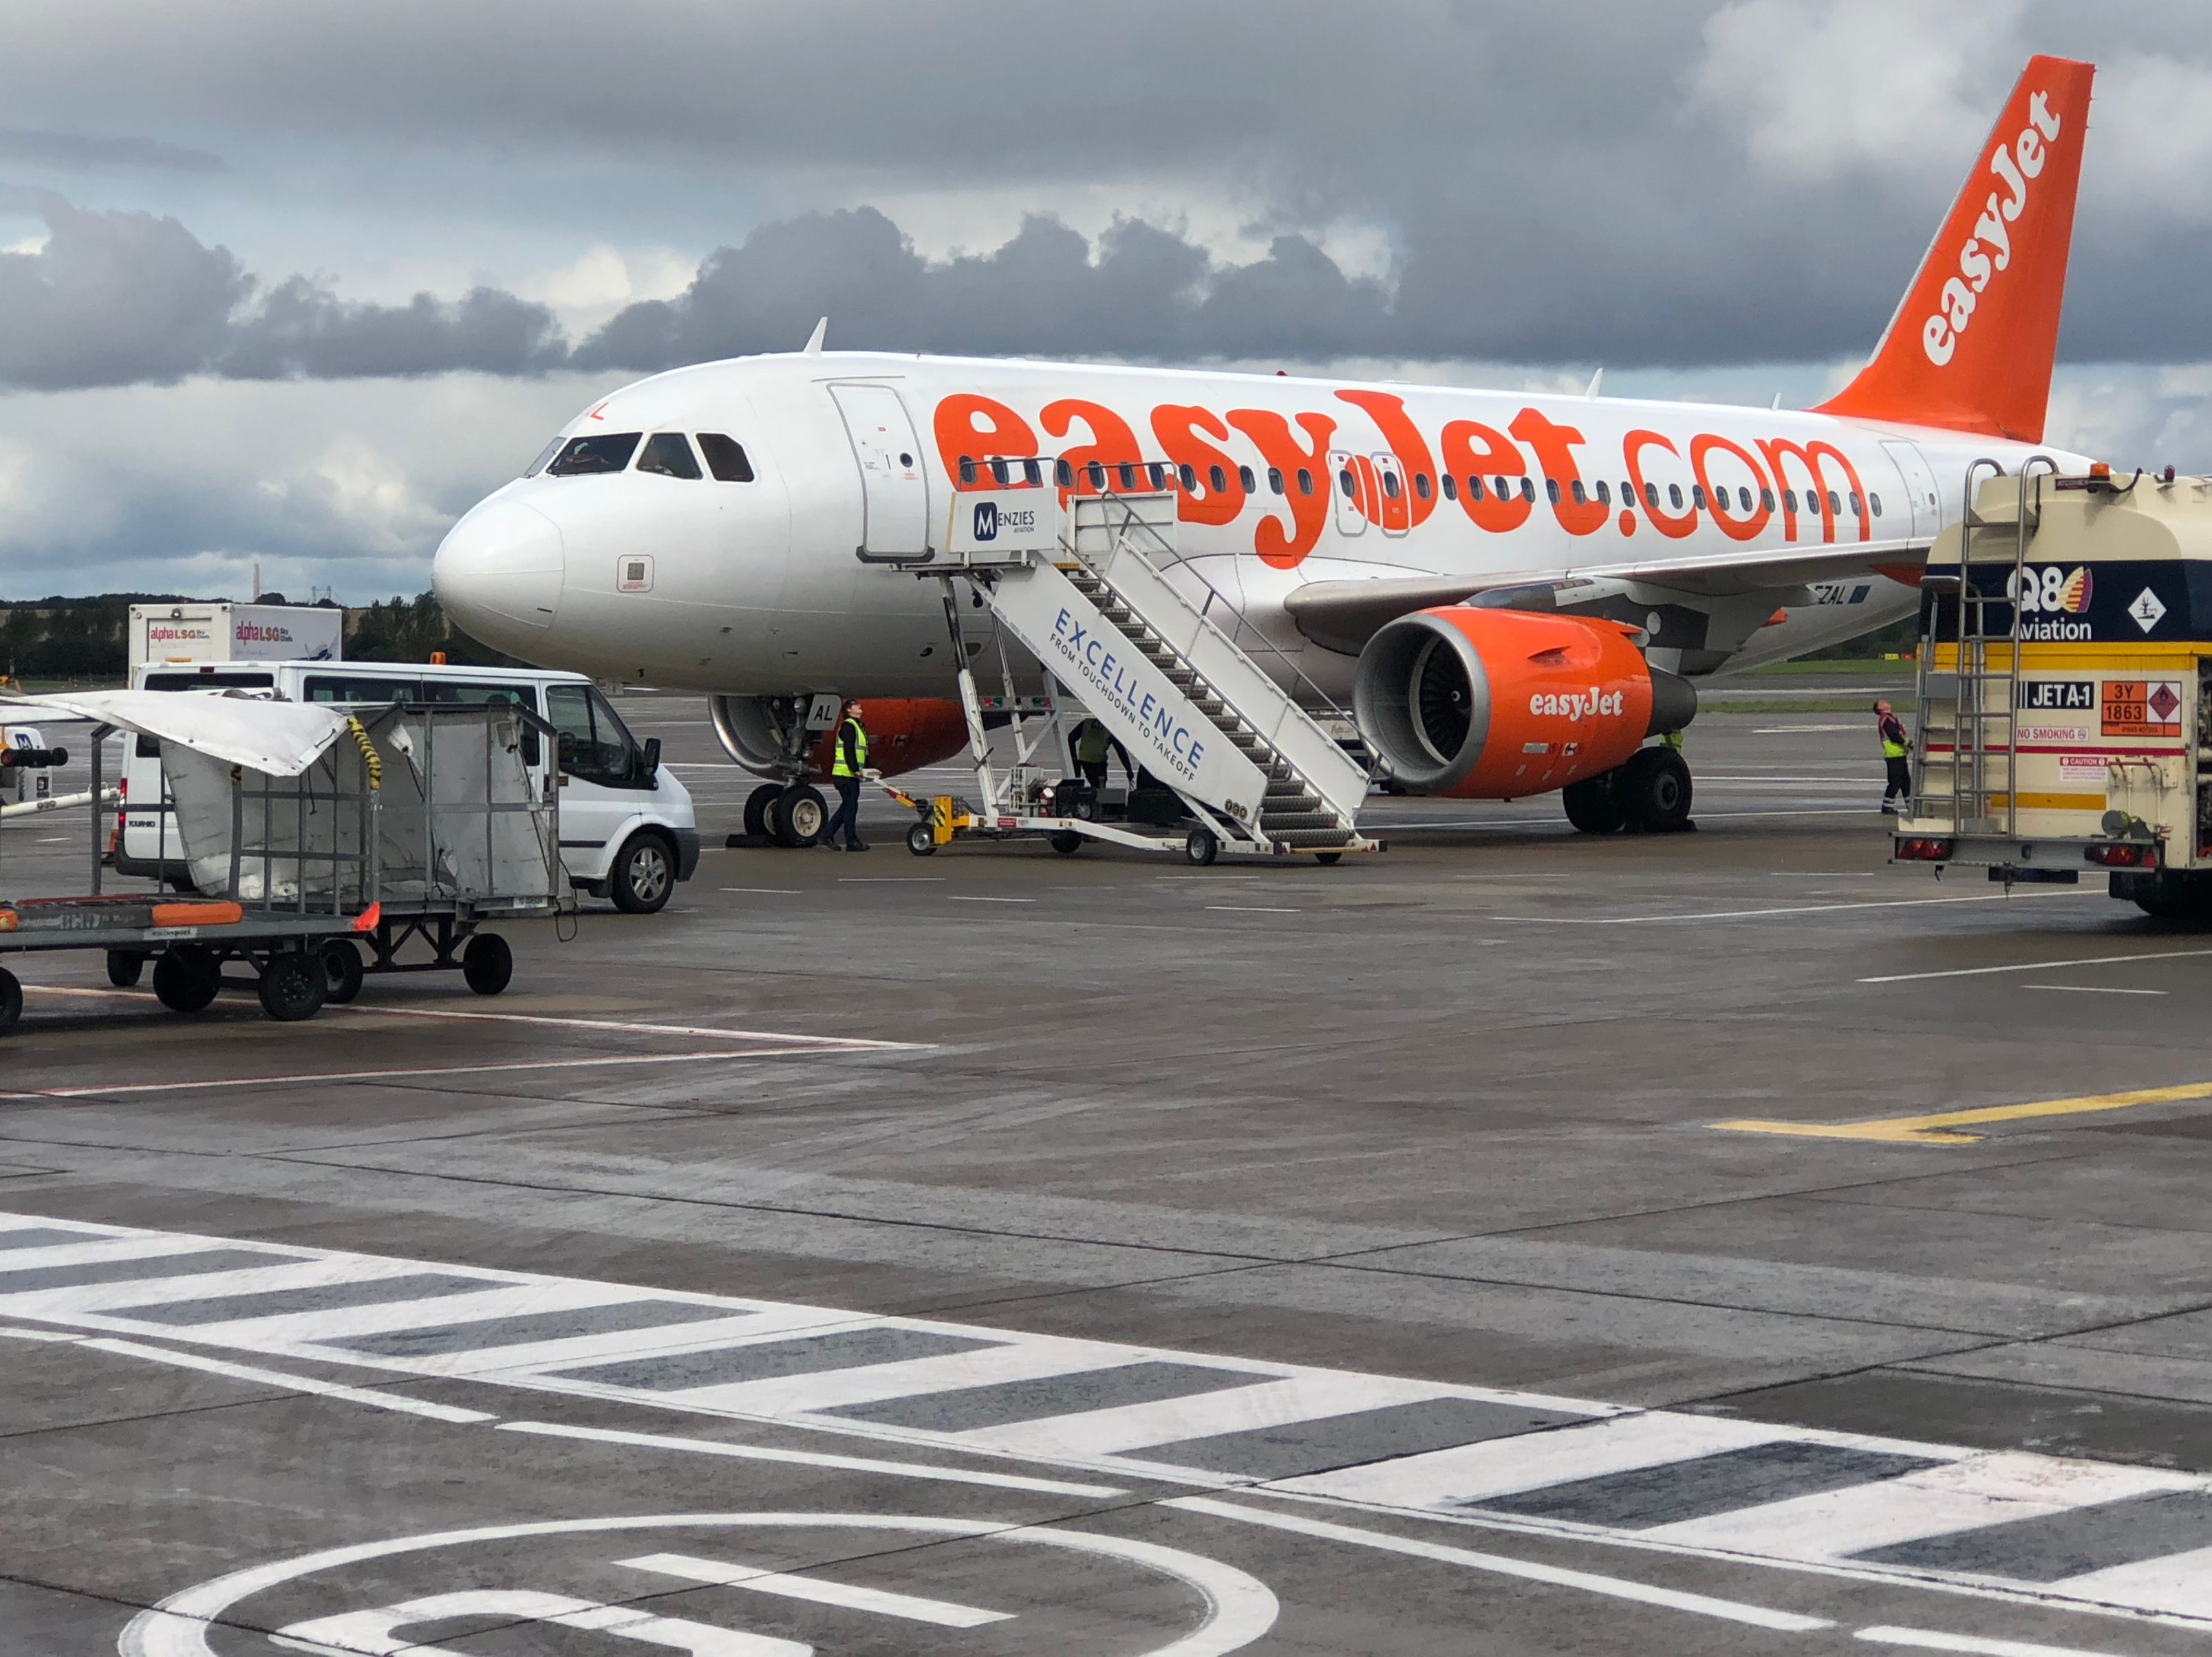 New destination: easyJet aircraft at Edinburgh airport, soon to be connected to Bournemouth